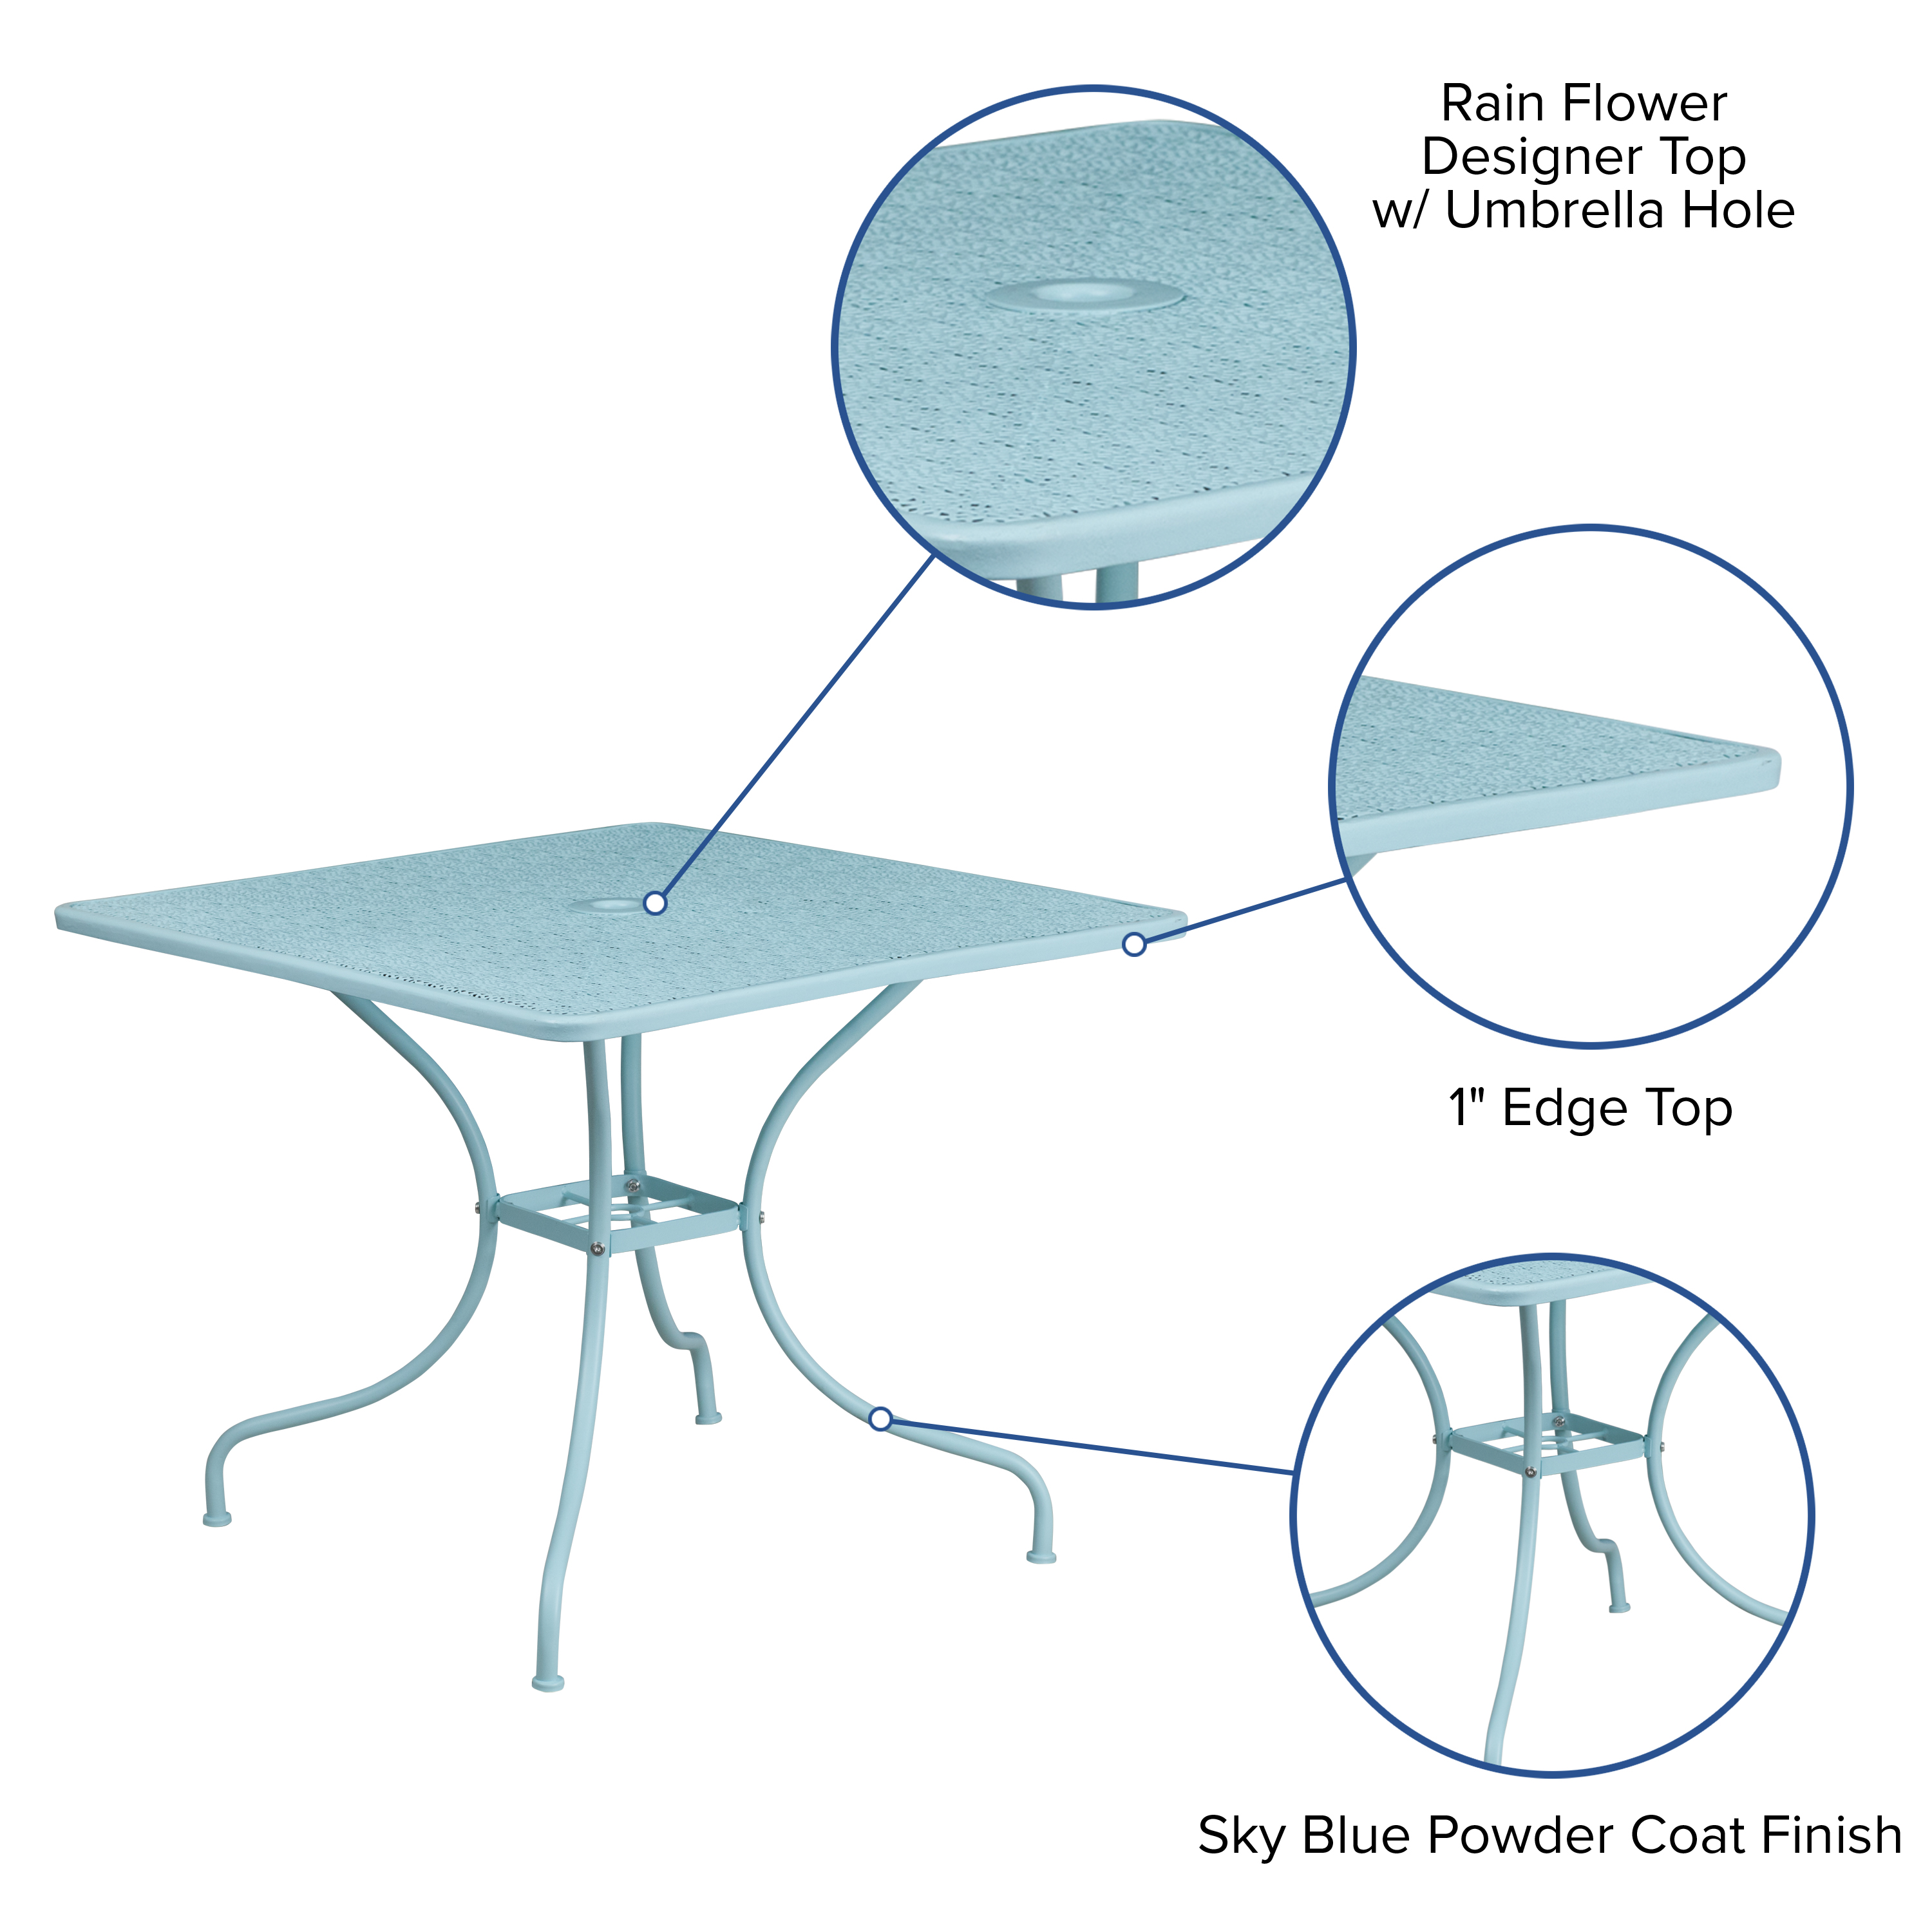 Flash Furniture Commercial Grade 35.5" Square Sky Blue Indoor-Outdoor Steel Patio Table with Umbrella Hole - image 4 of 8